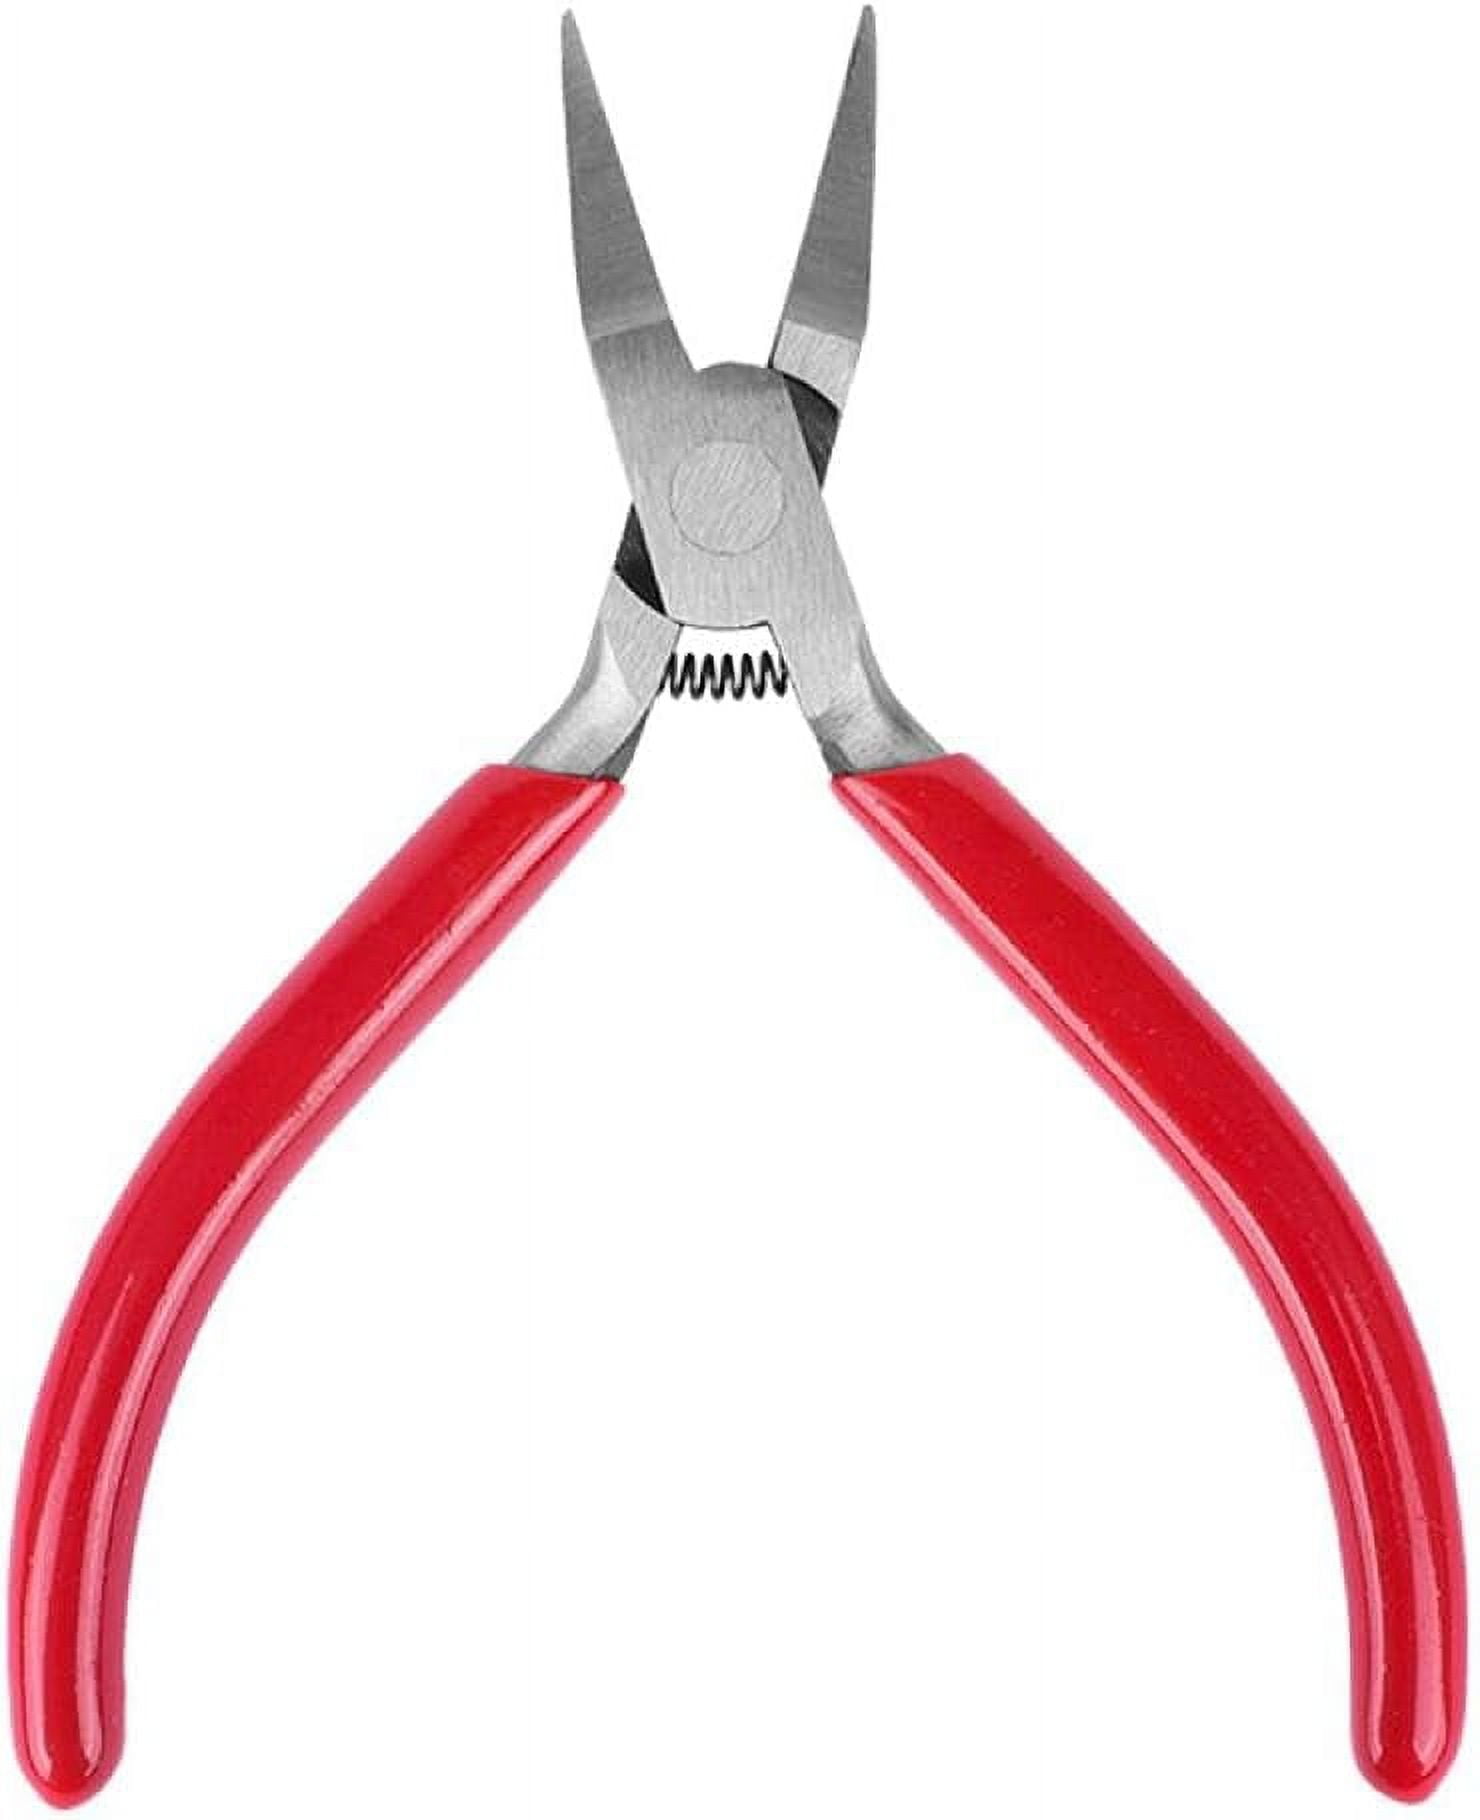 Jewelry Flat Nose Pliers, 127mm Long Crafting Pliers, Metal With Rubber  Handles, Basic Tool For Crafts & Jewelry Making, Silver and Red